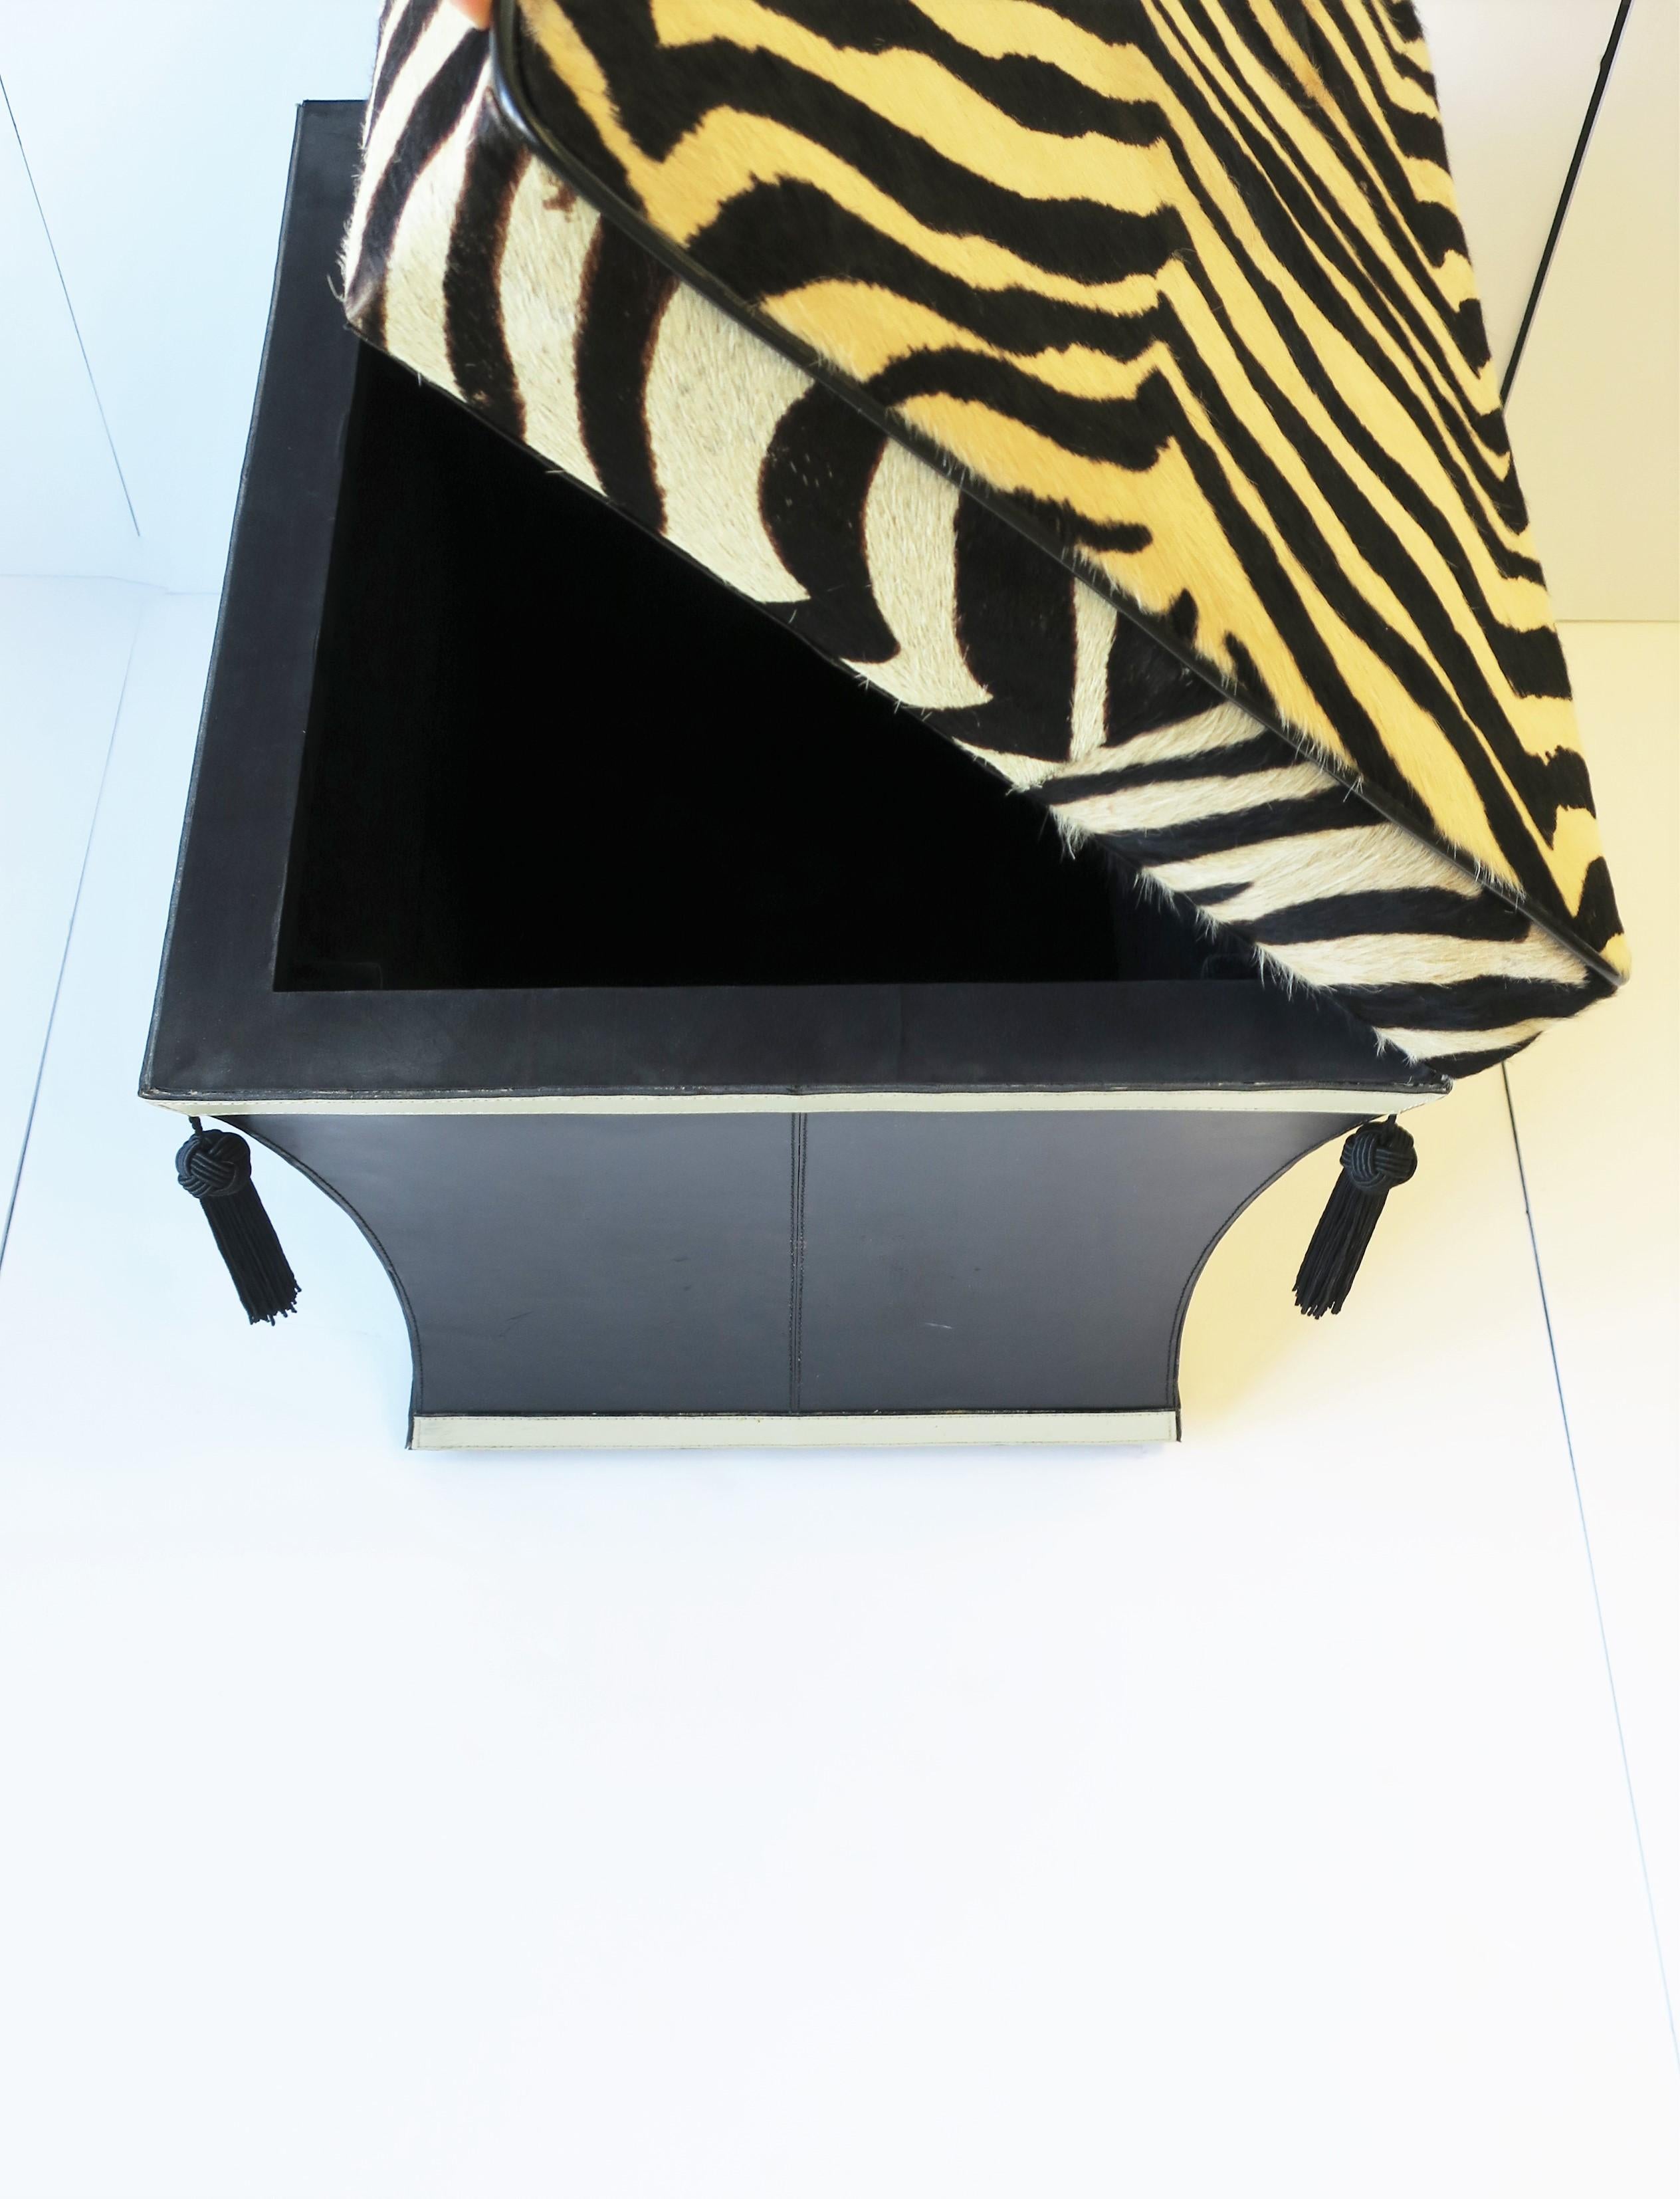 Zebra Hide Bench Stool with Storage Trunk and Tassels, circa 1980s 1990s For Sale 7